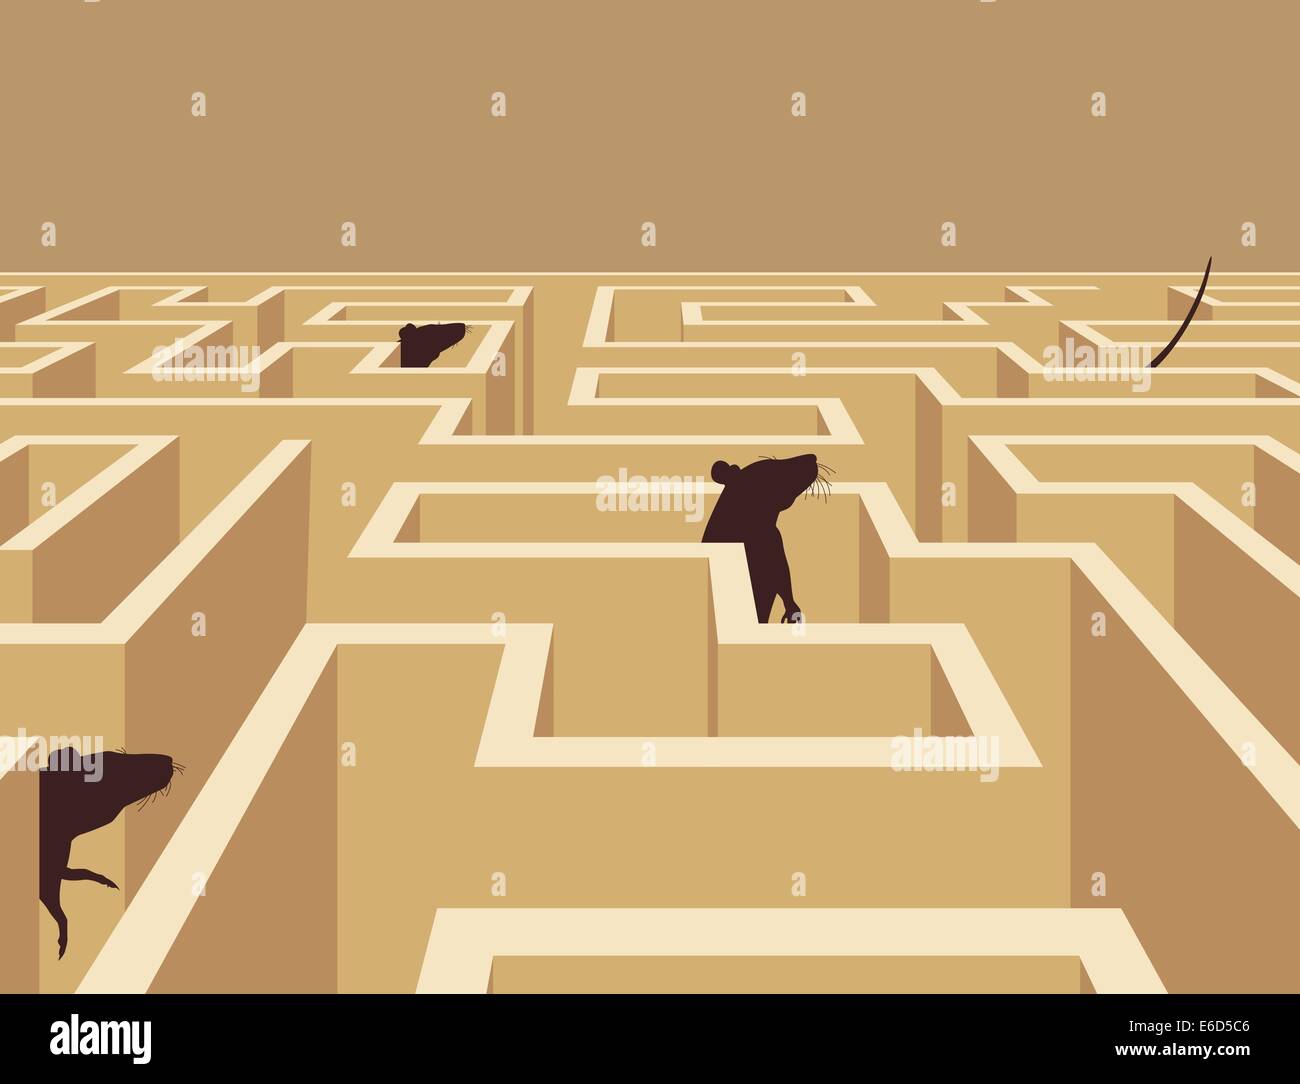 Editable vector illustration of rats in a maze Stock Vector